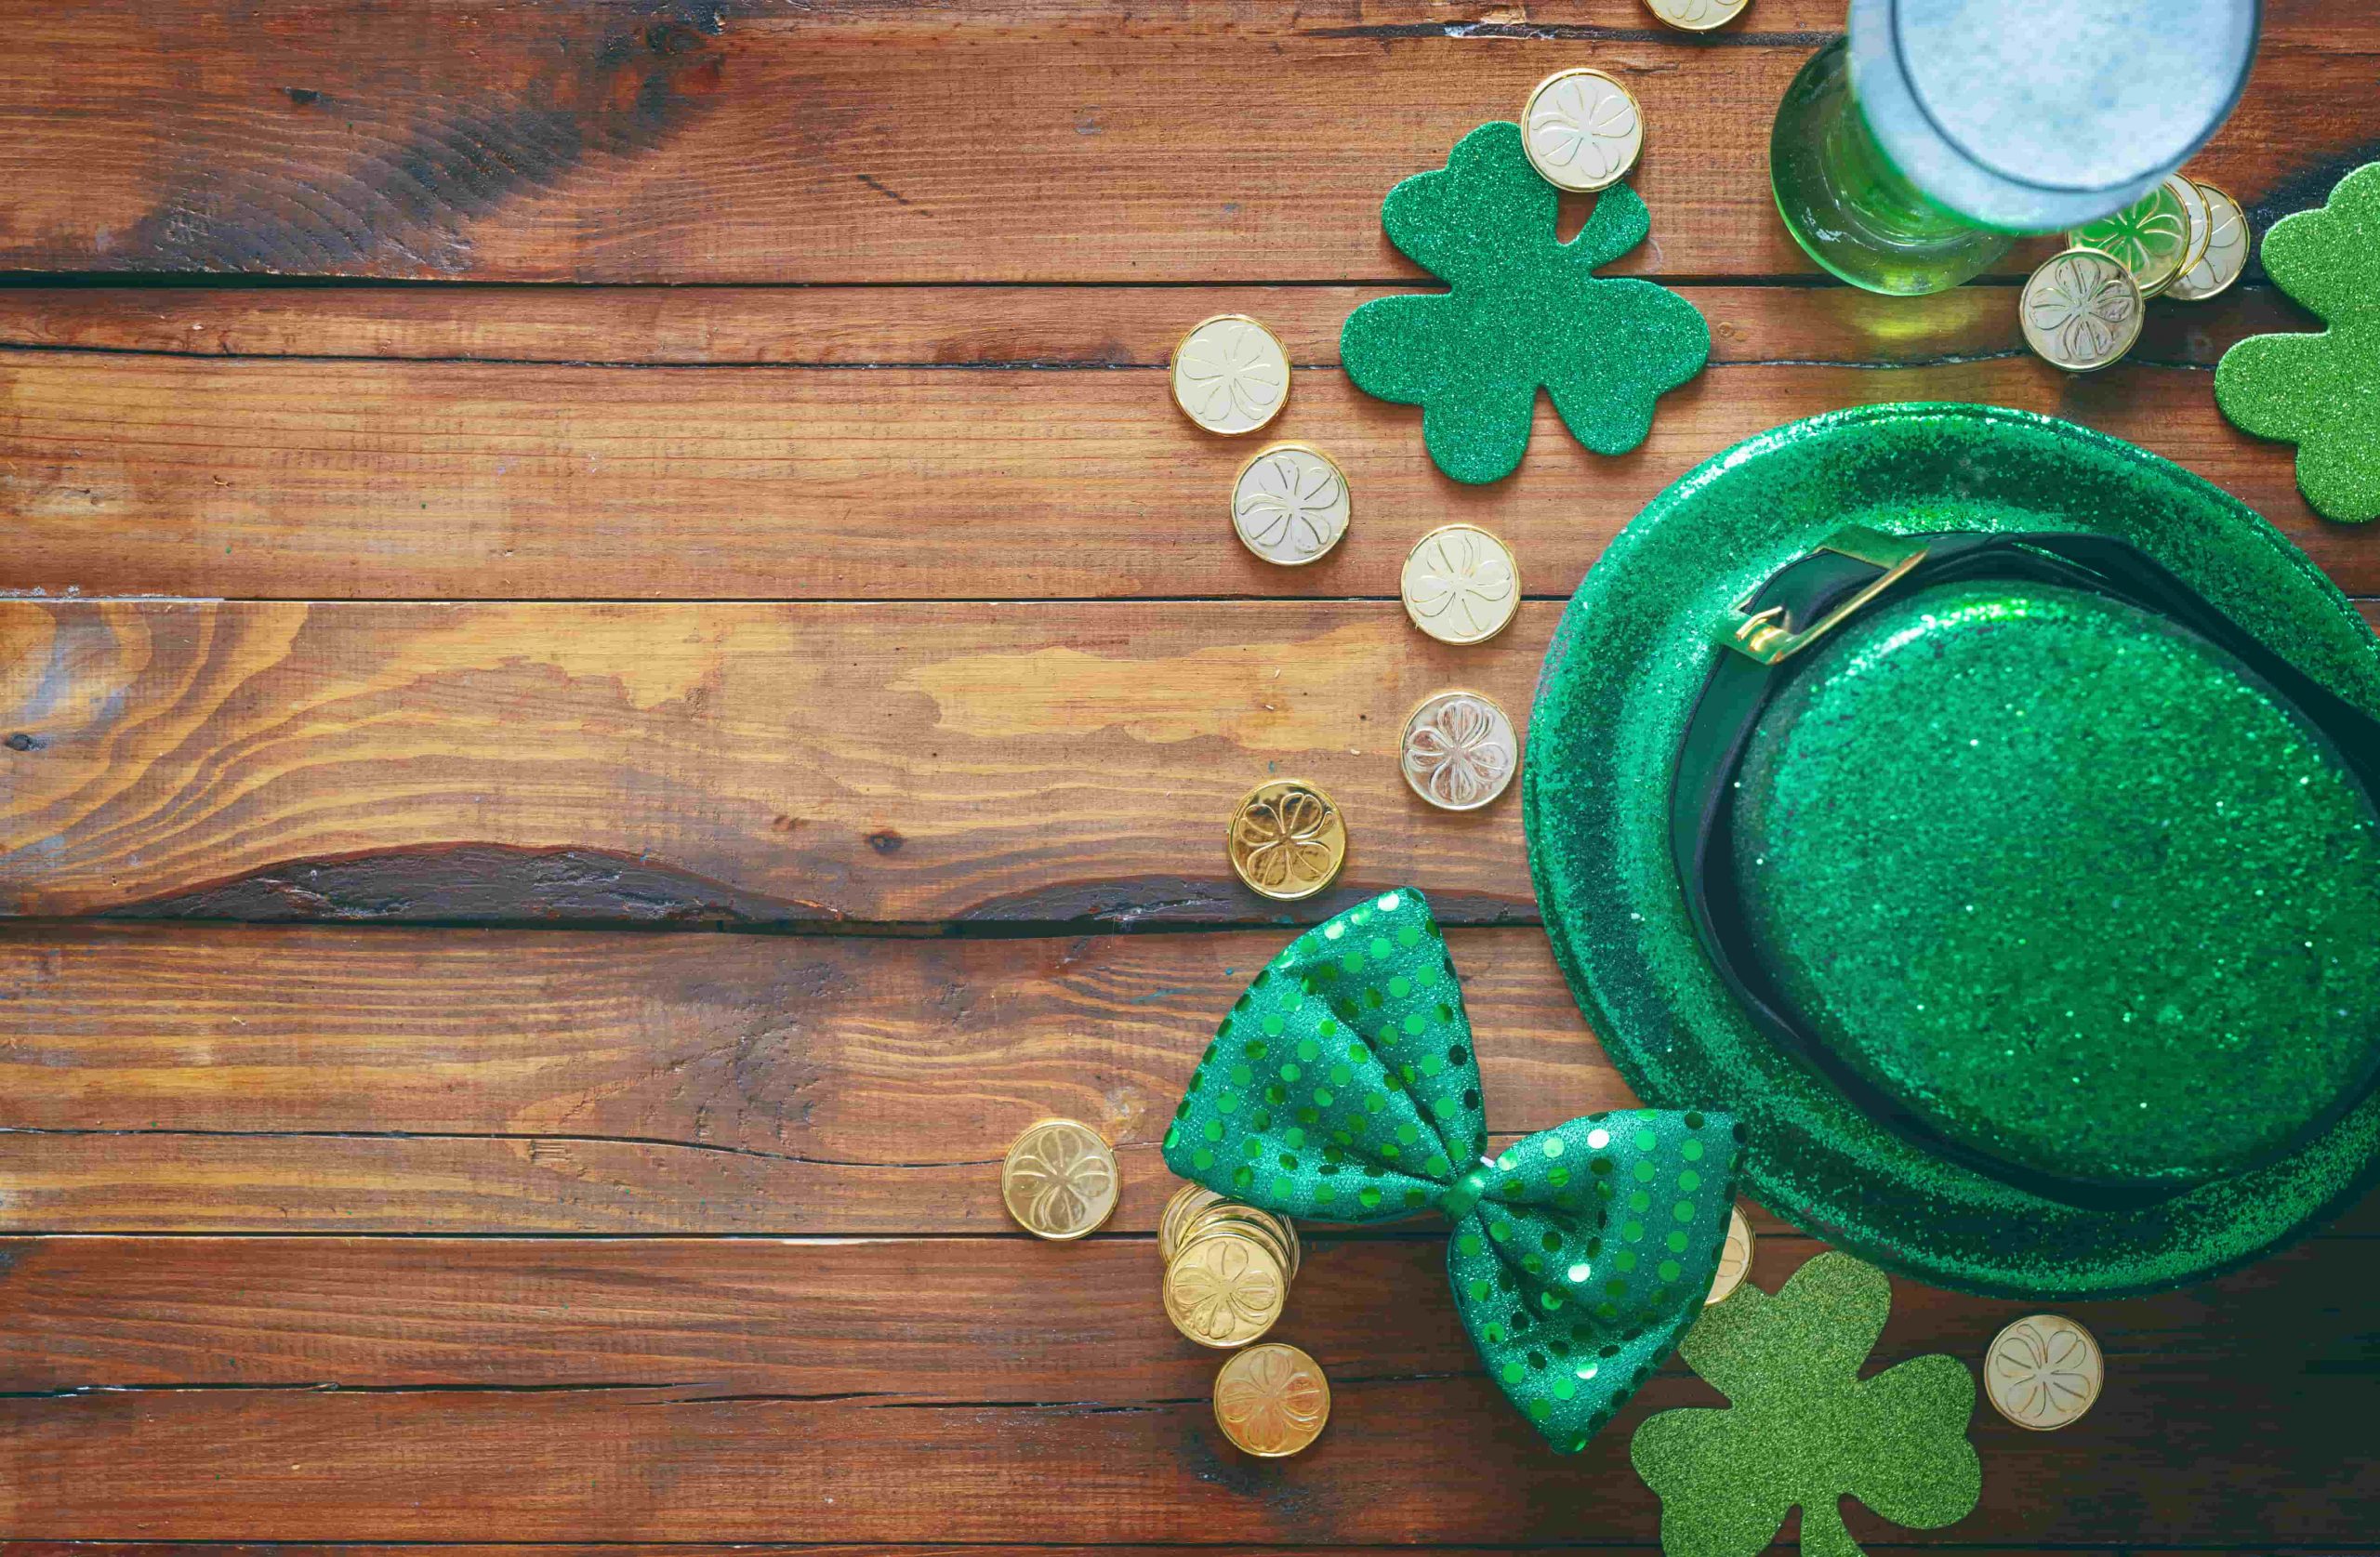 Commercial photography for St. Patrick’s Day, green props and decorations for the Irish holiday.